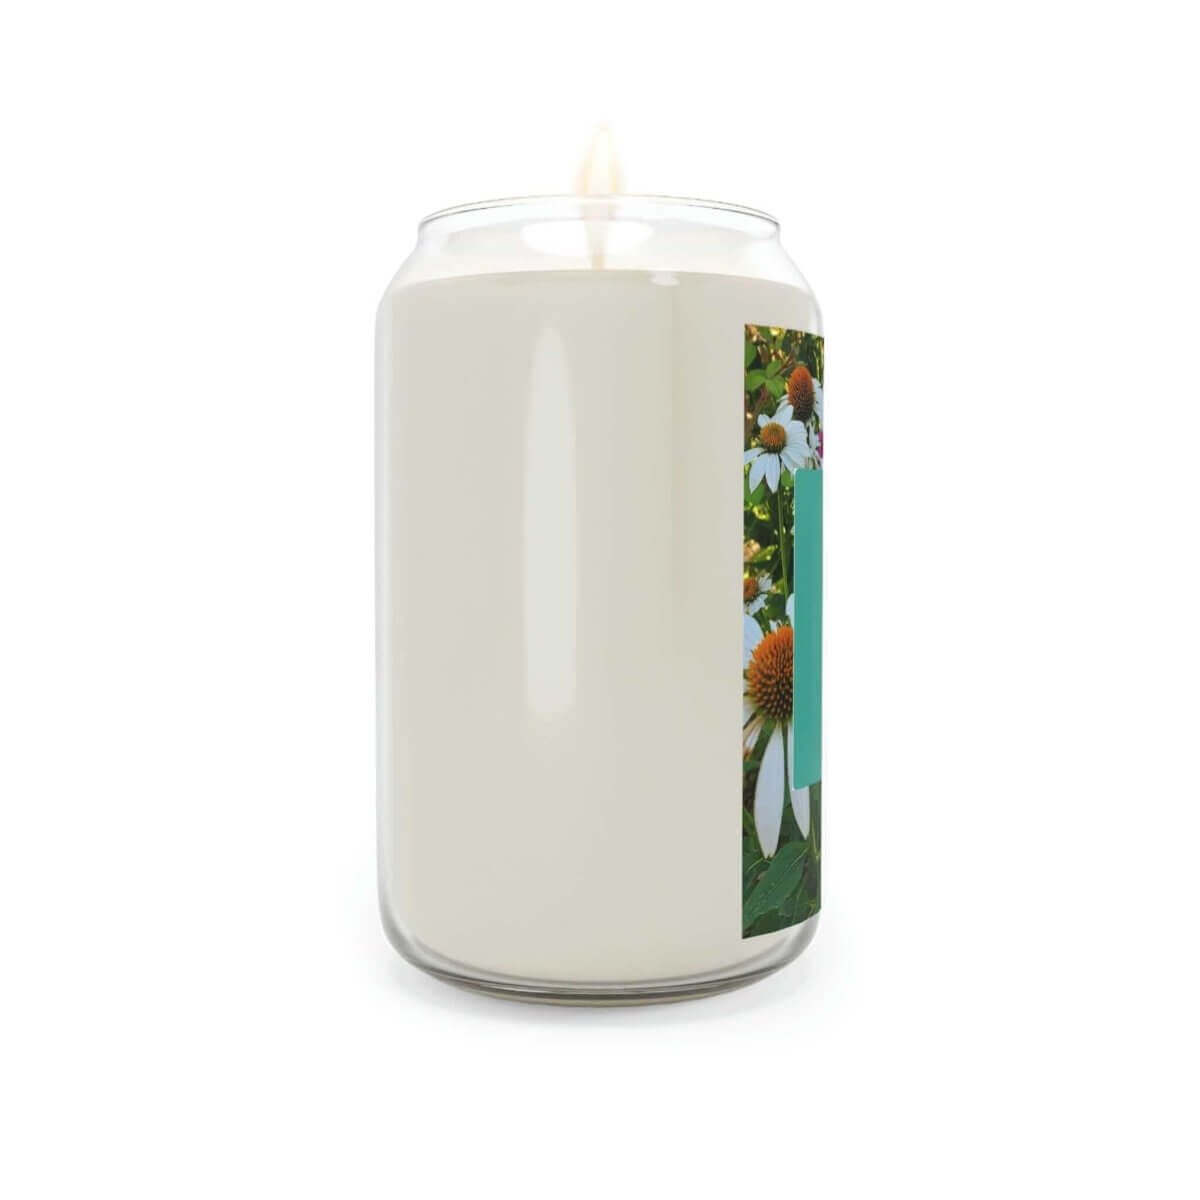 Scented Natural Soy Wax Candle 13.75oz - Hearth Home & Living